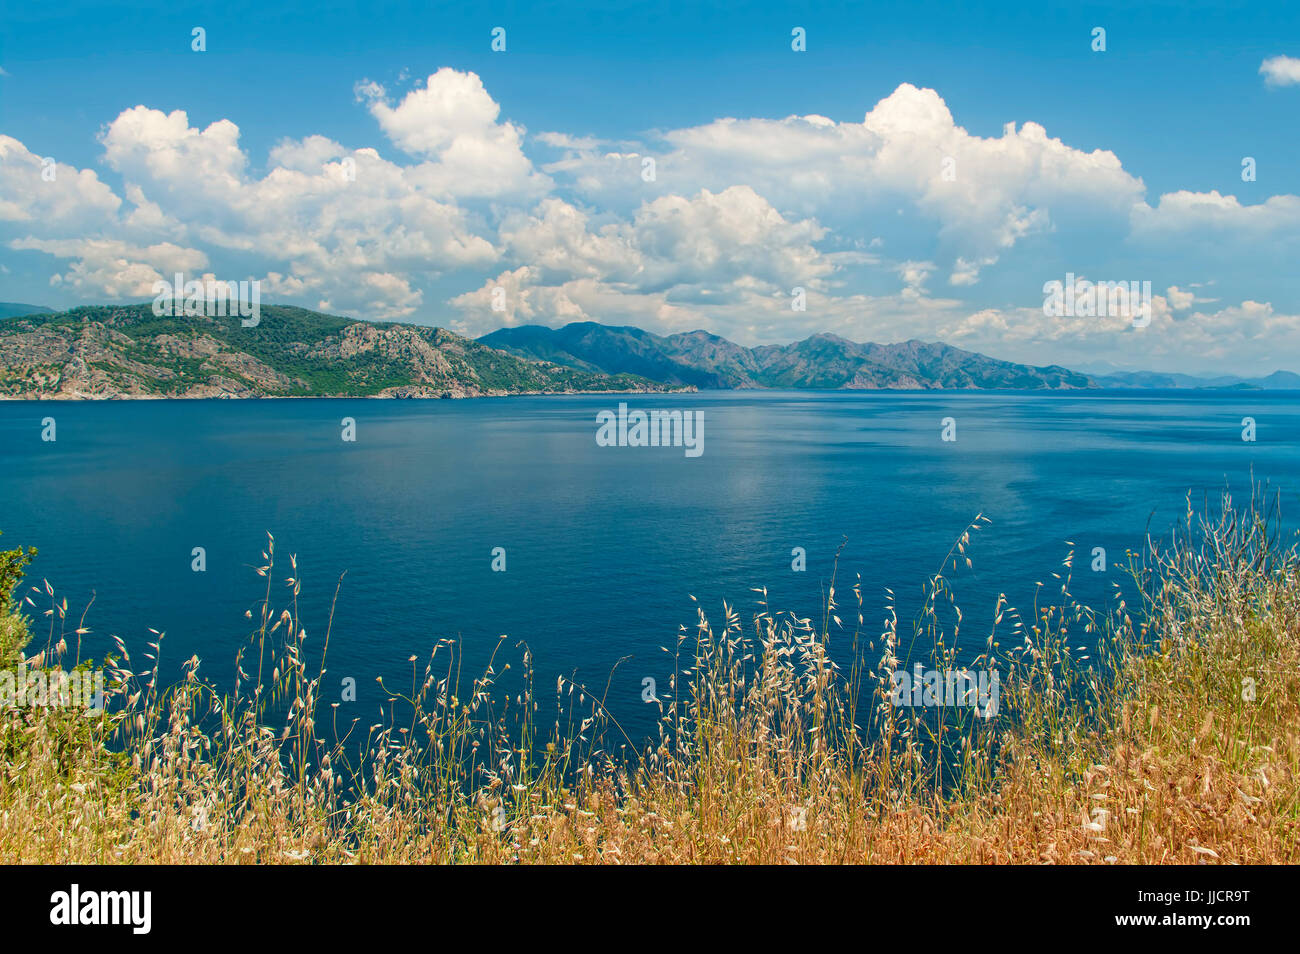 Aegean sea view with tall dry yellow grass at foreground and green mountains and blue cloudy sky at background in Amos Bay, Mugla, Turkey Stock Photo